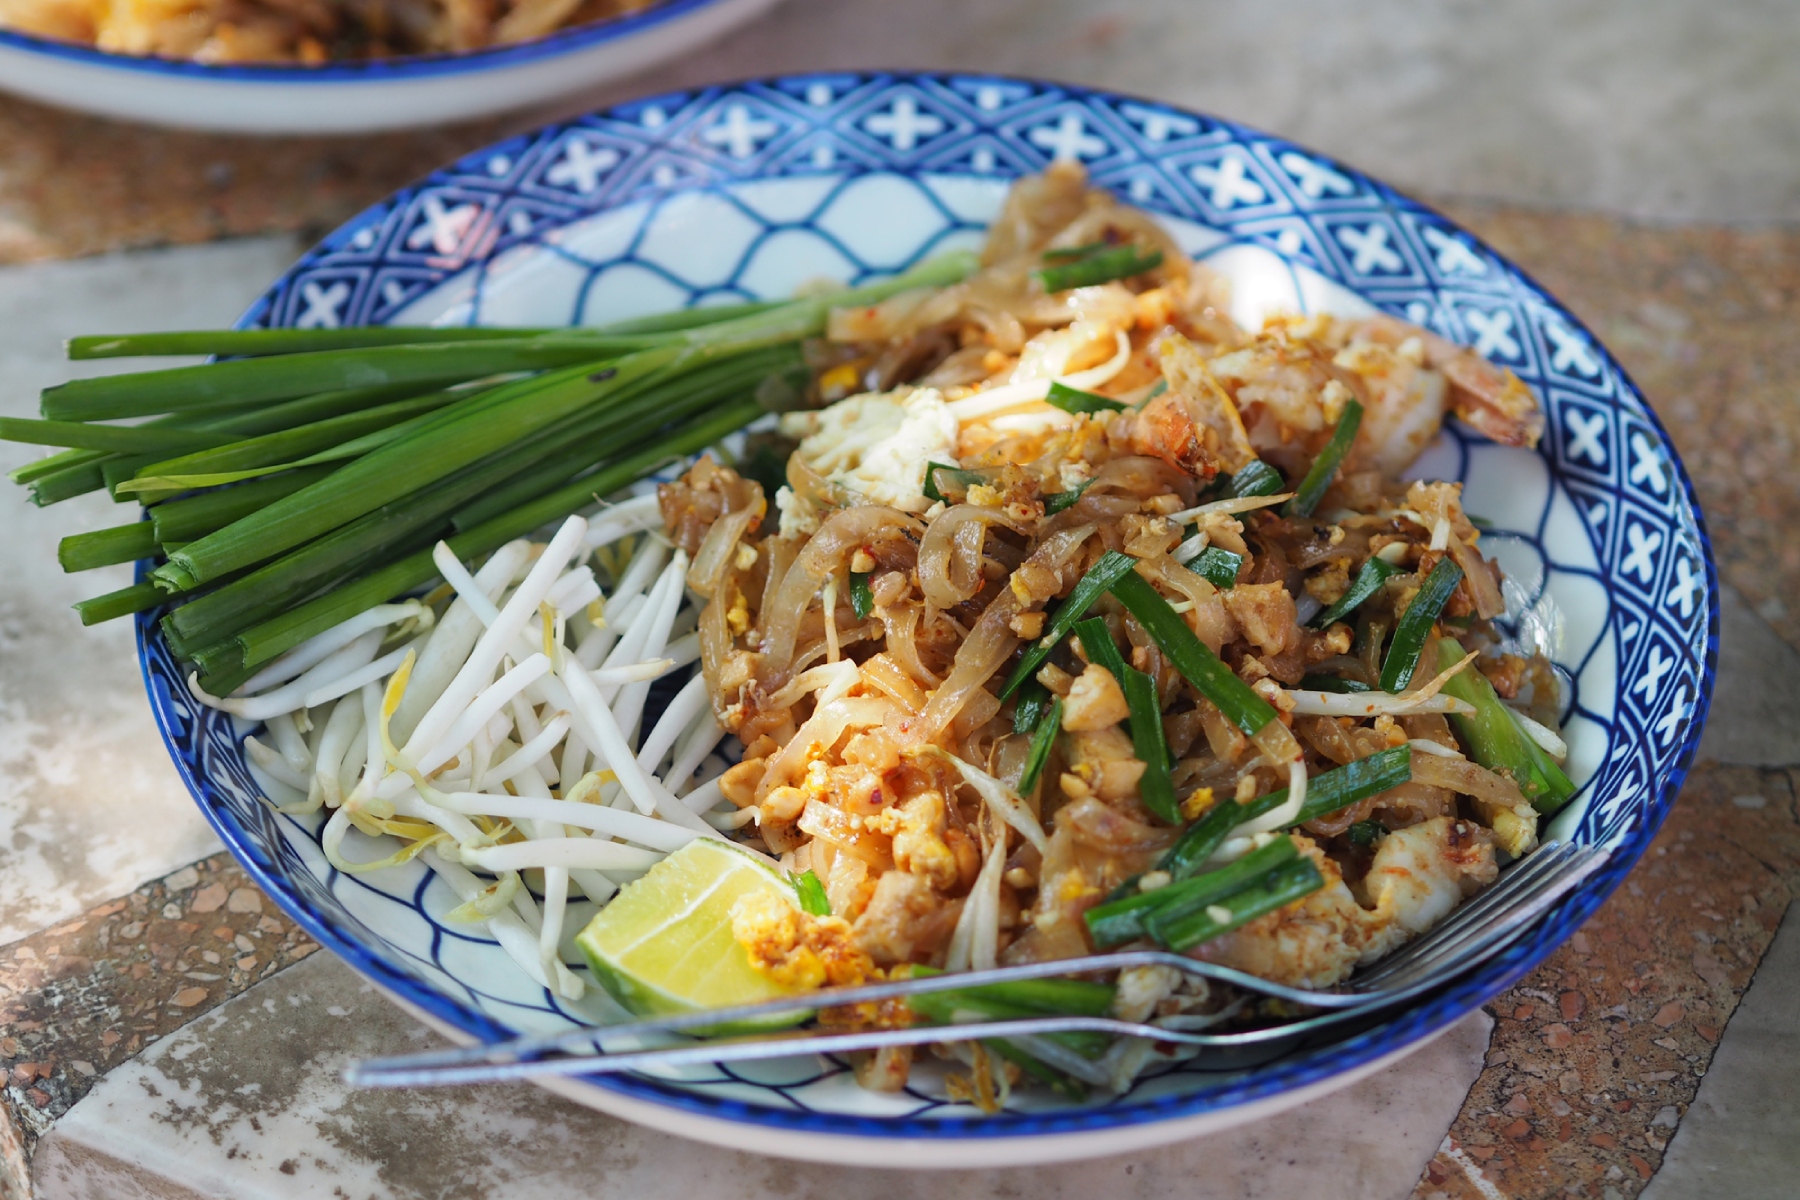 Pad thai prepared with chopped tofu in a bright blue and white plate